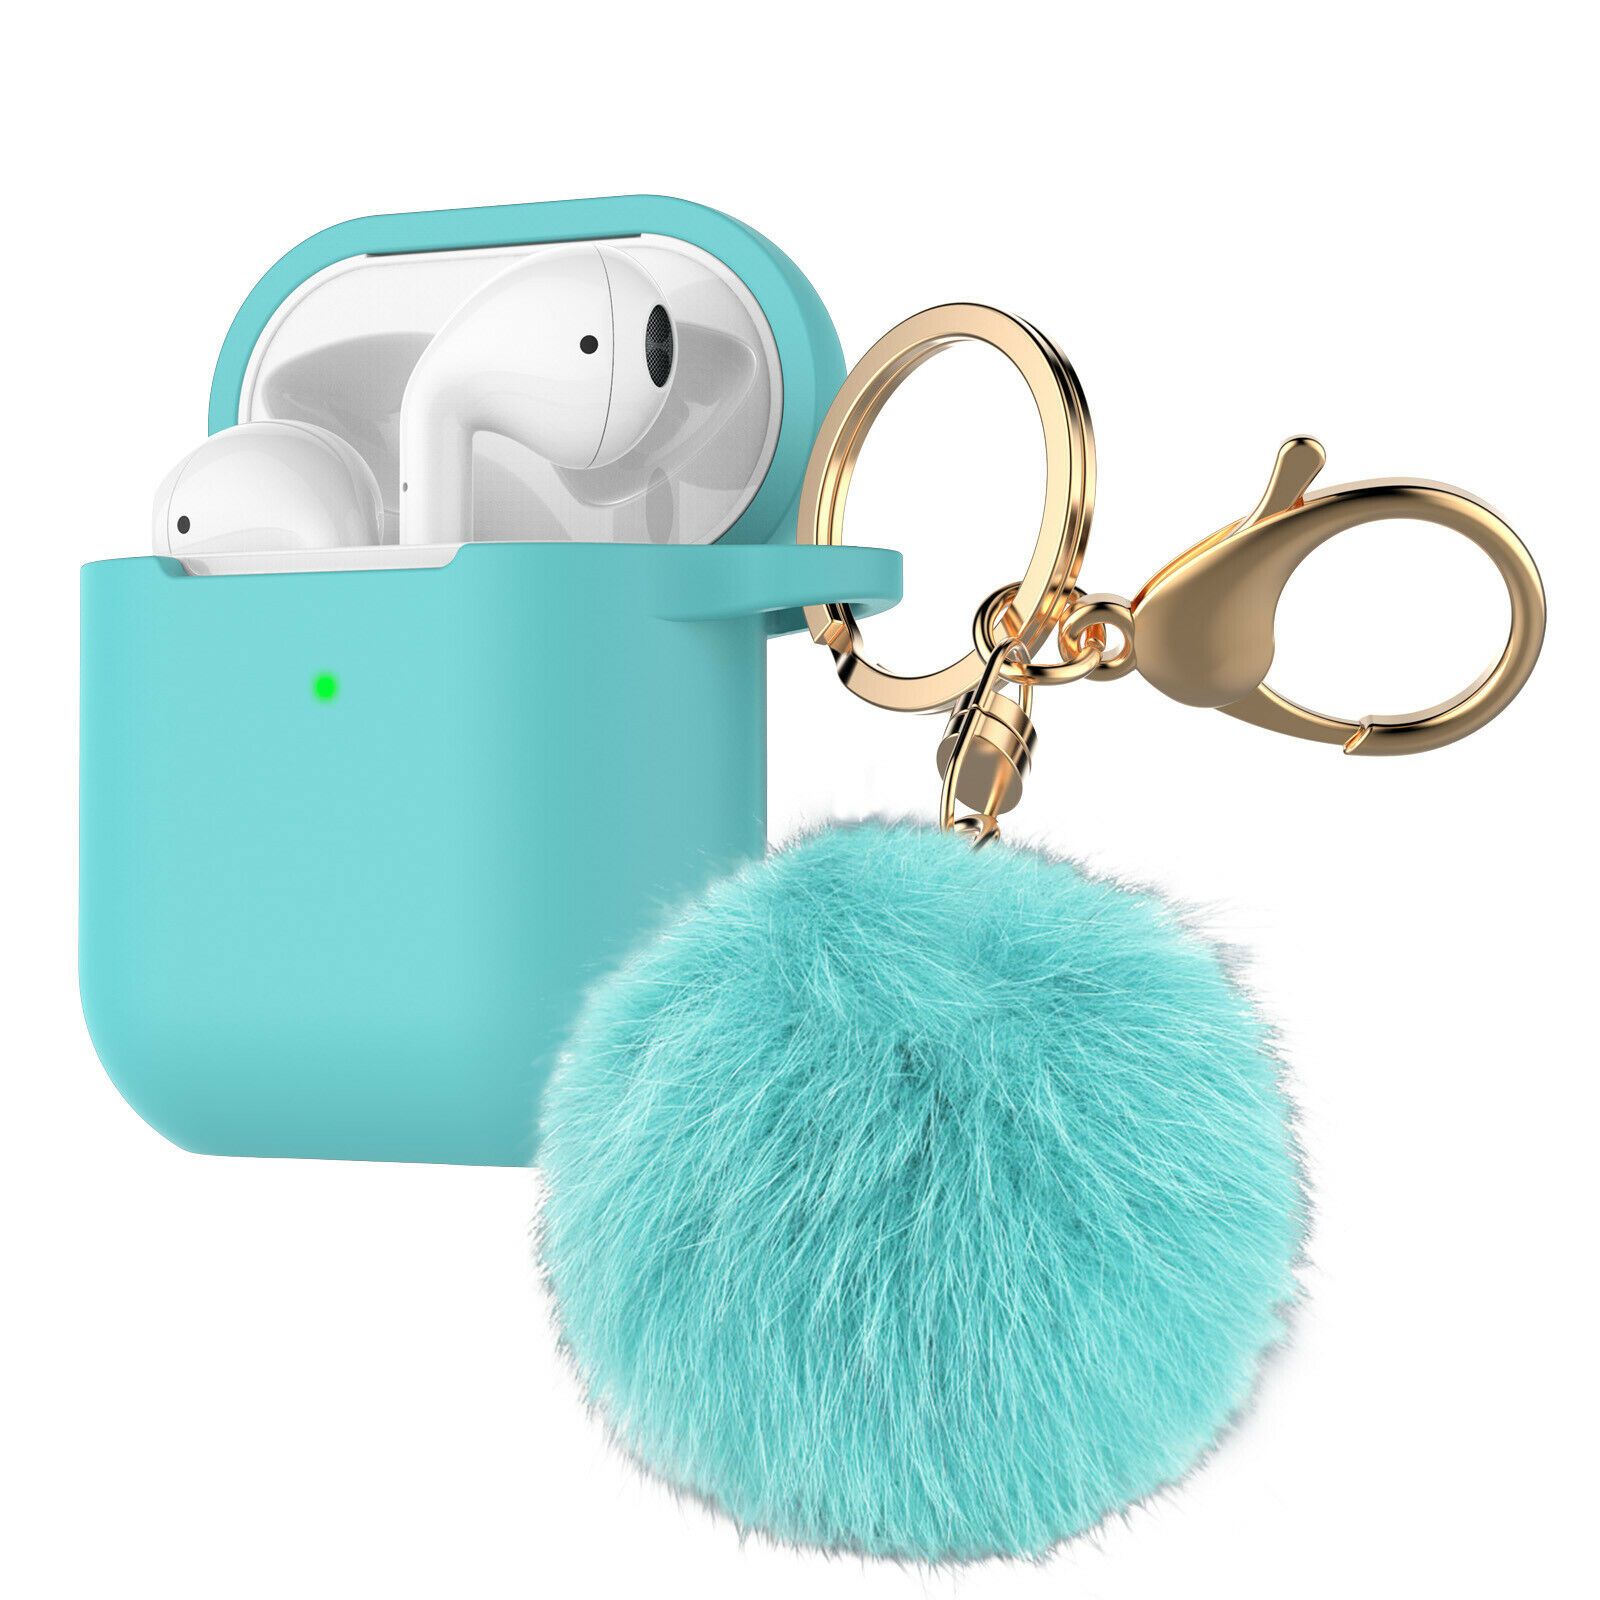 Airpods Silicone Charging Case Cover Fur Ball Keychain For Apple AirPods 1/2 Airpods Case hellotecusa Mint Green 